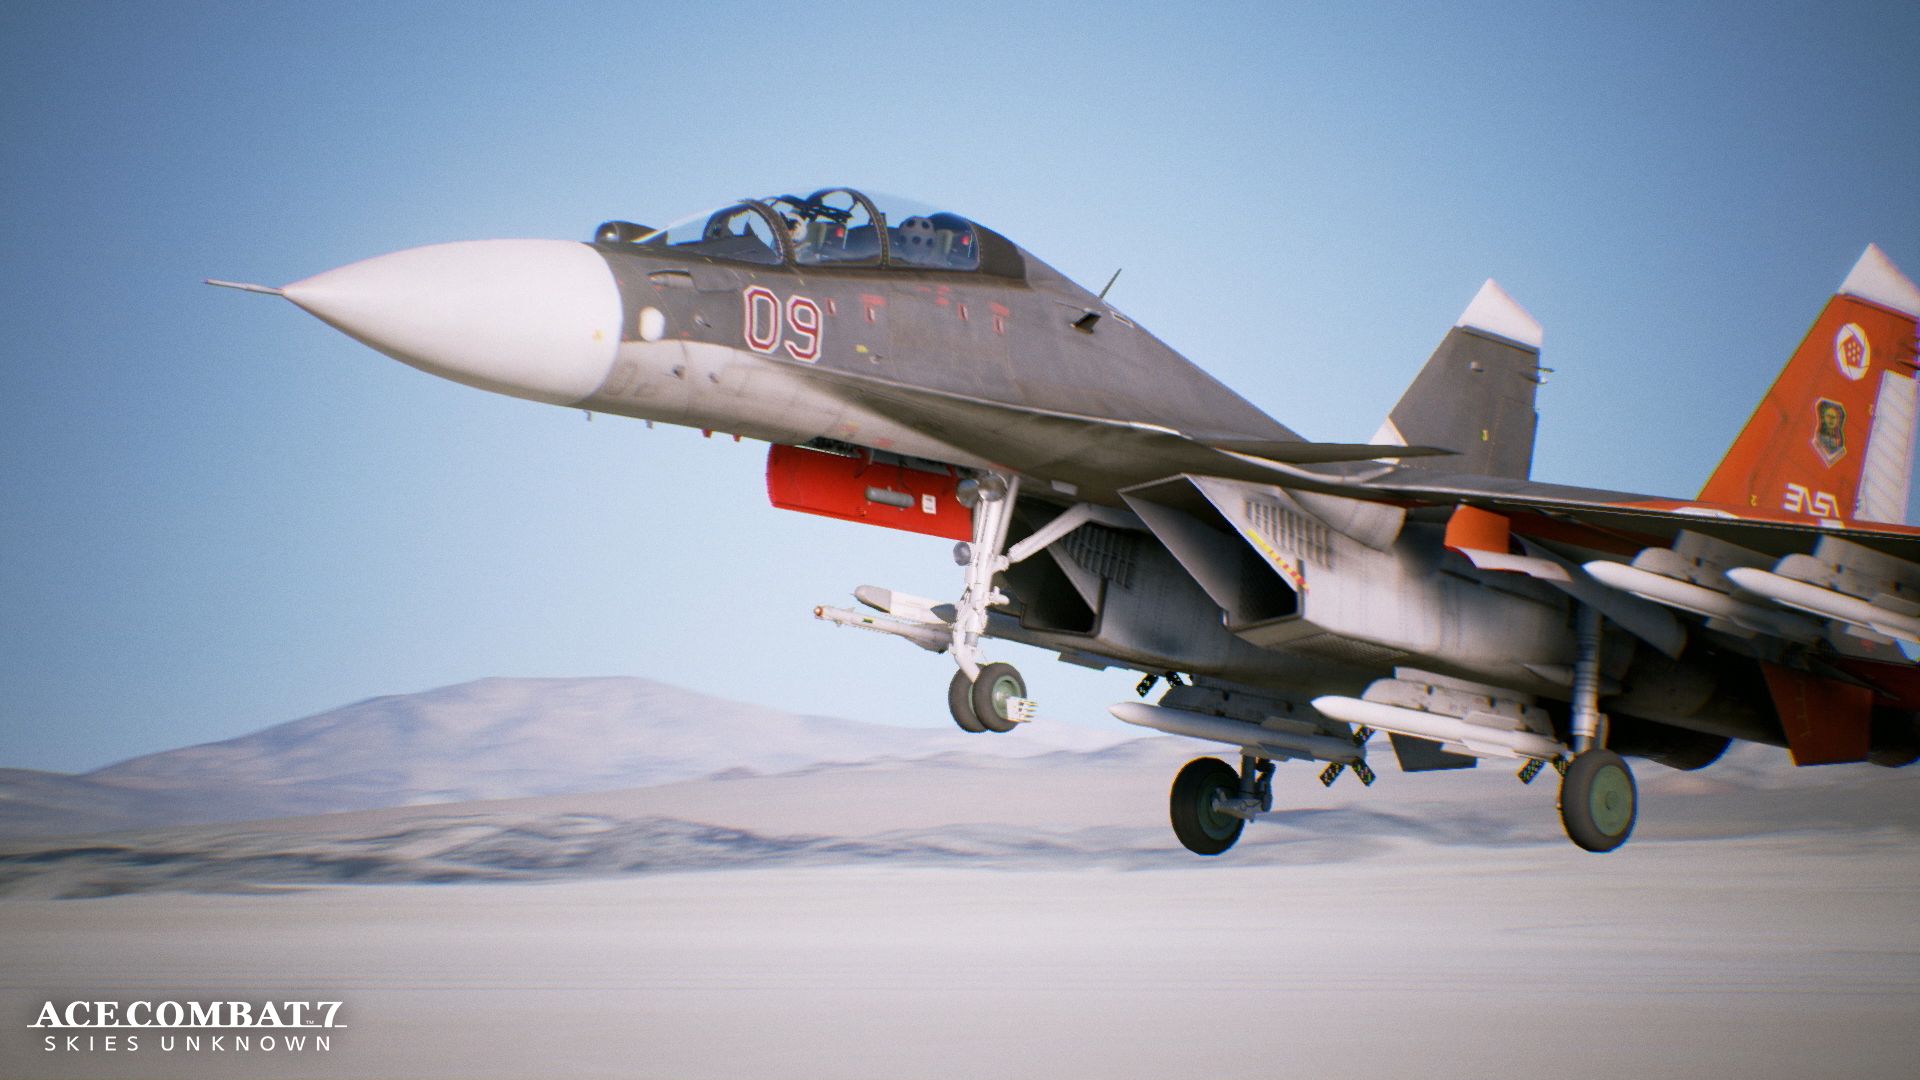 New Ace Combat 7 Trailer Finally Reveals the Story; it's Full of ...